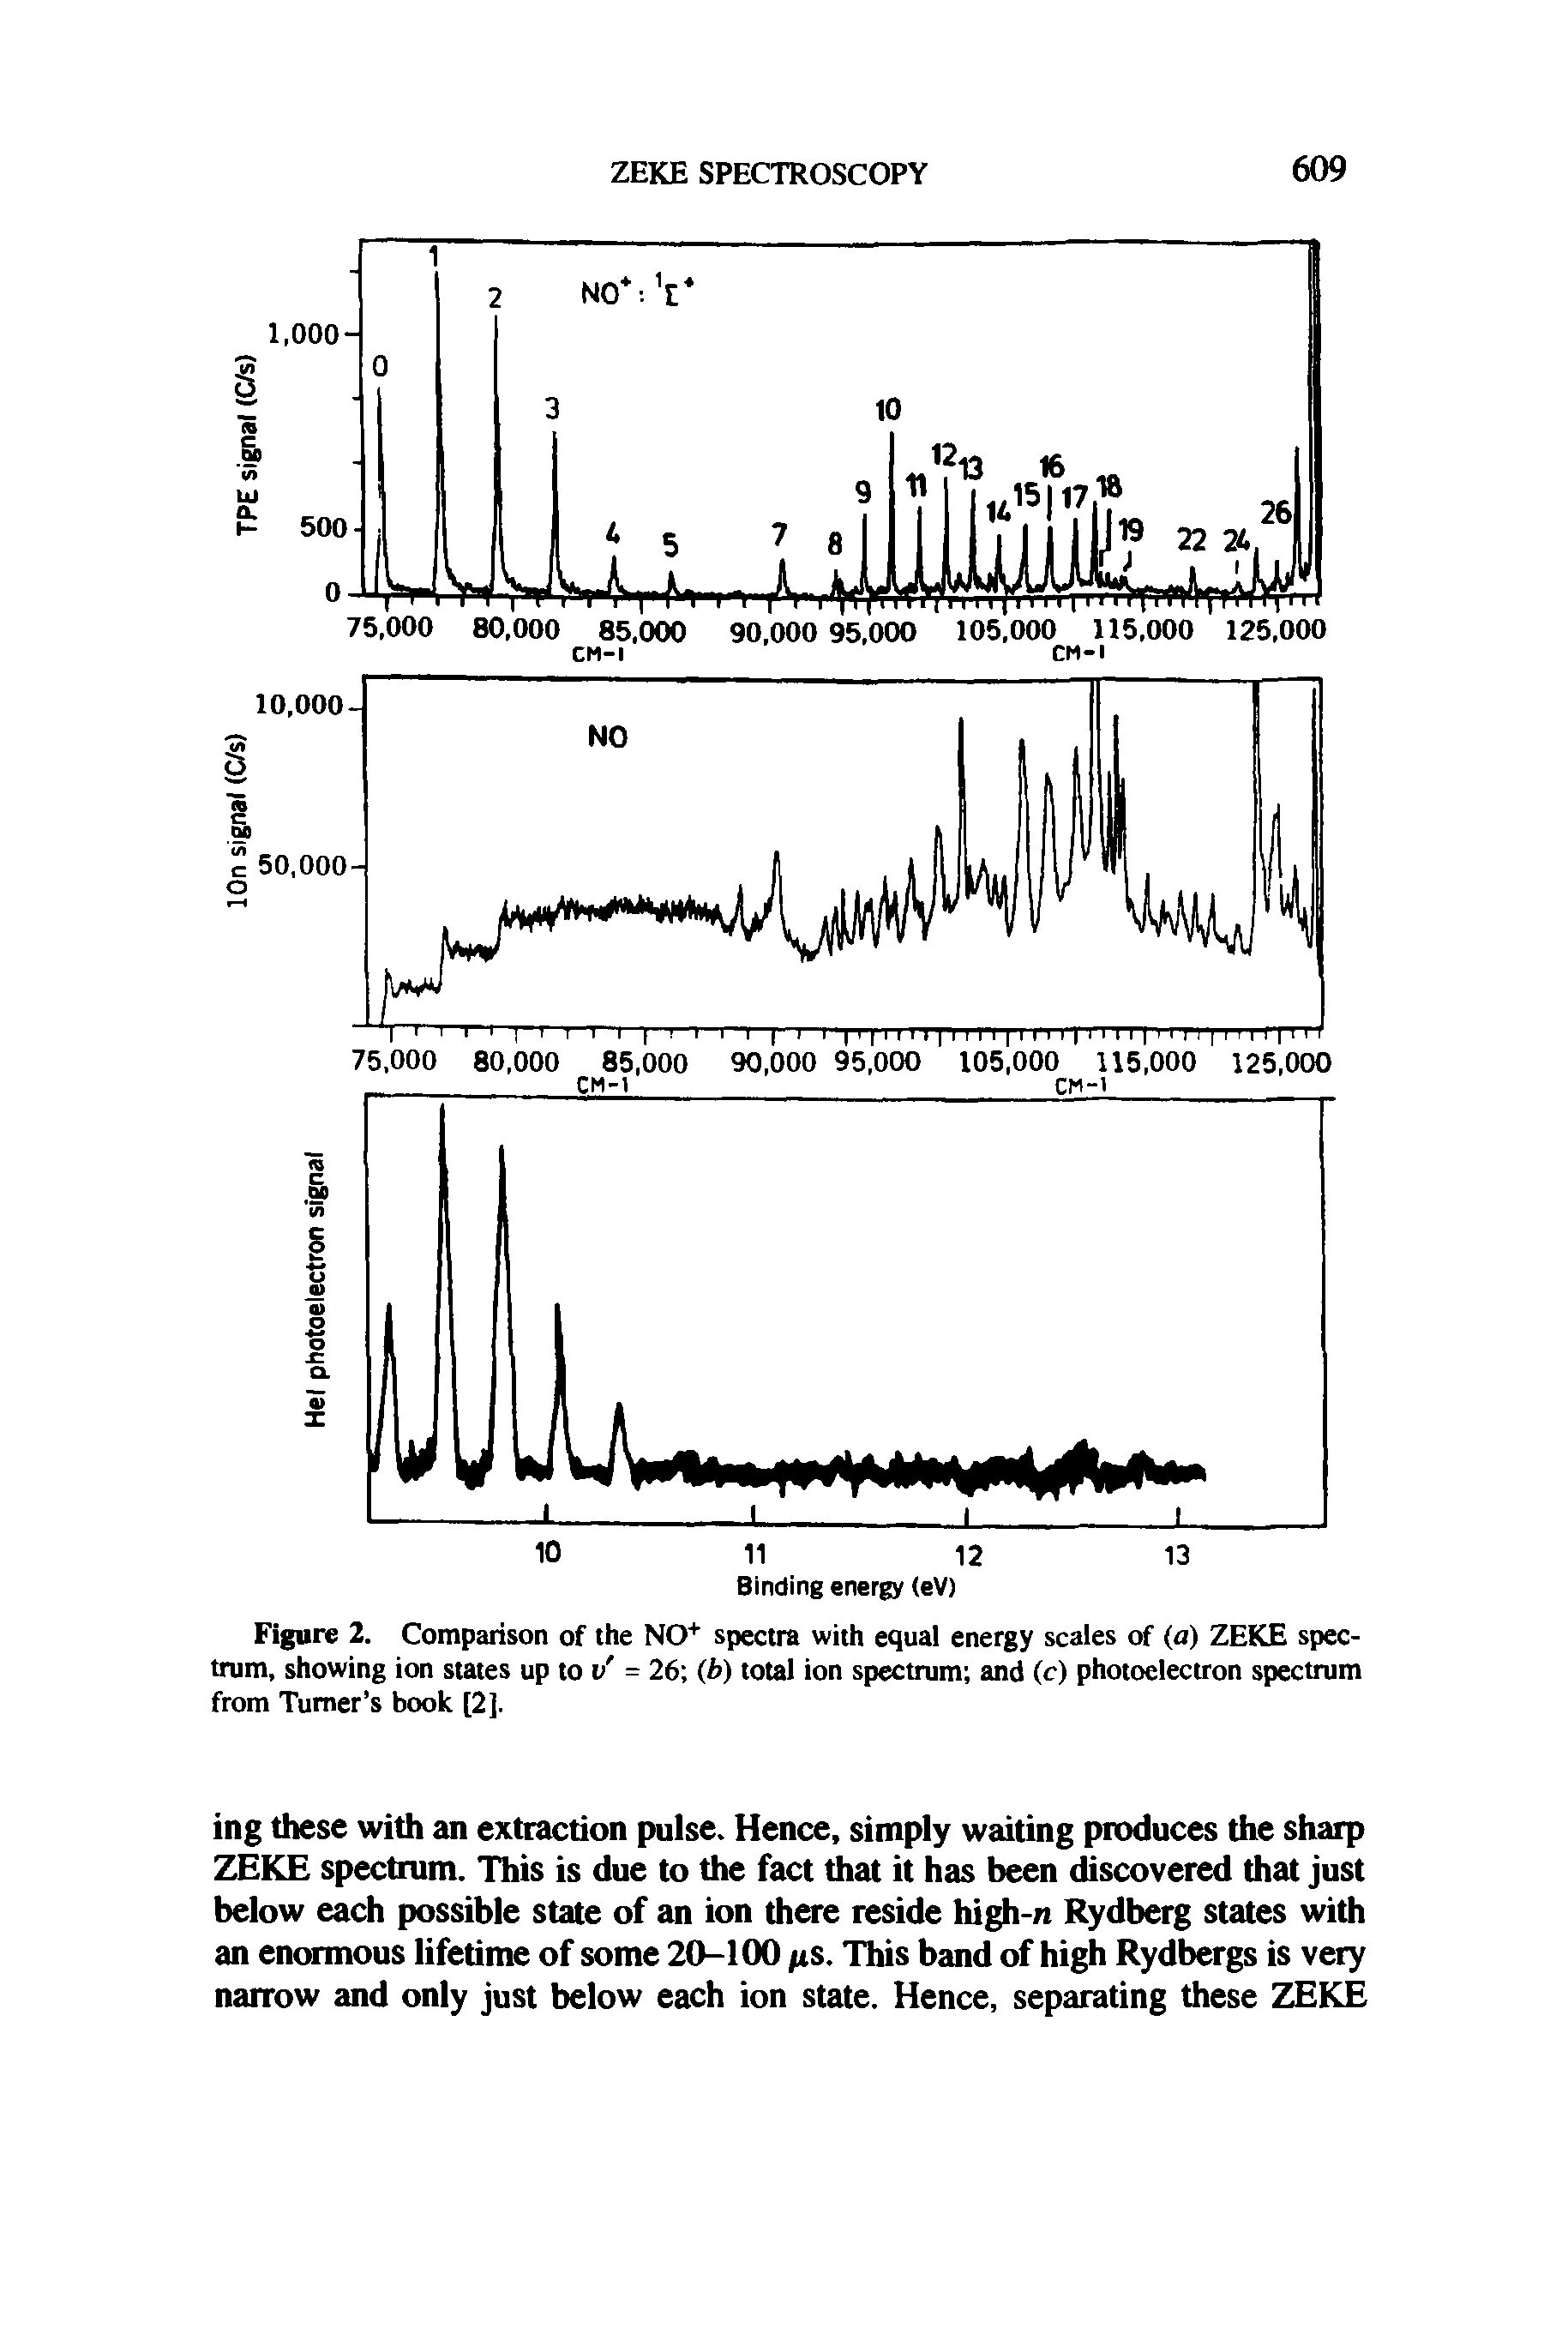 Figure 2. Comparison of the NO+ spectra with equal energy scales of (a) ZEKE spectrum, showing ion states up to v = 26 (b) total ion spectrum and (c) photoelectron spectrum from Turner s book [2].